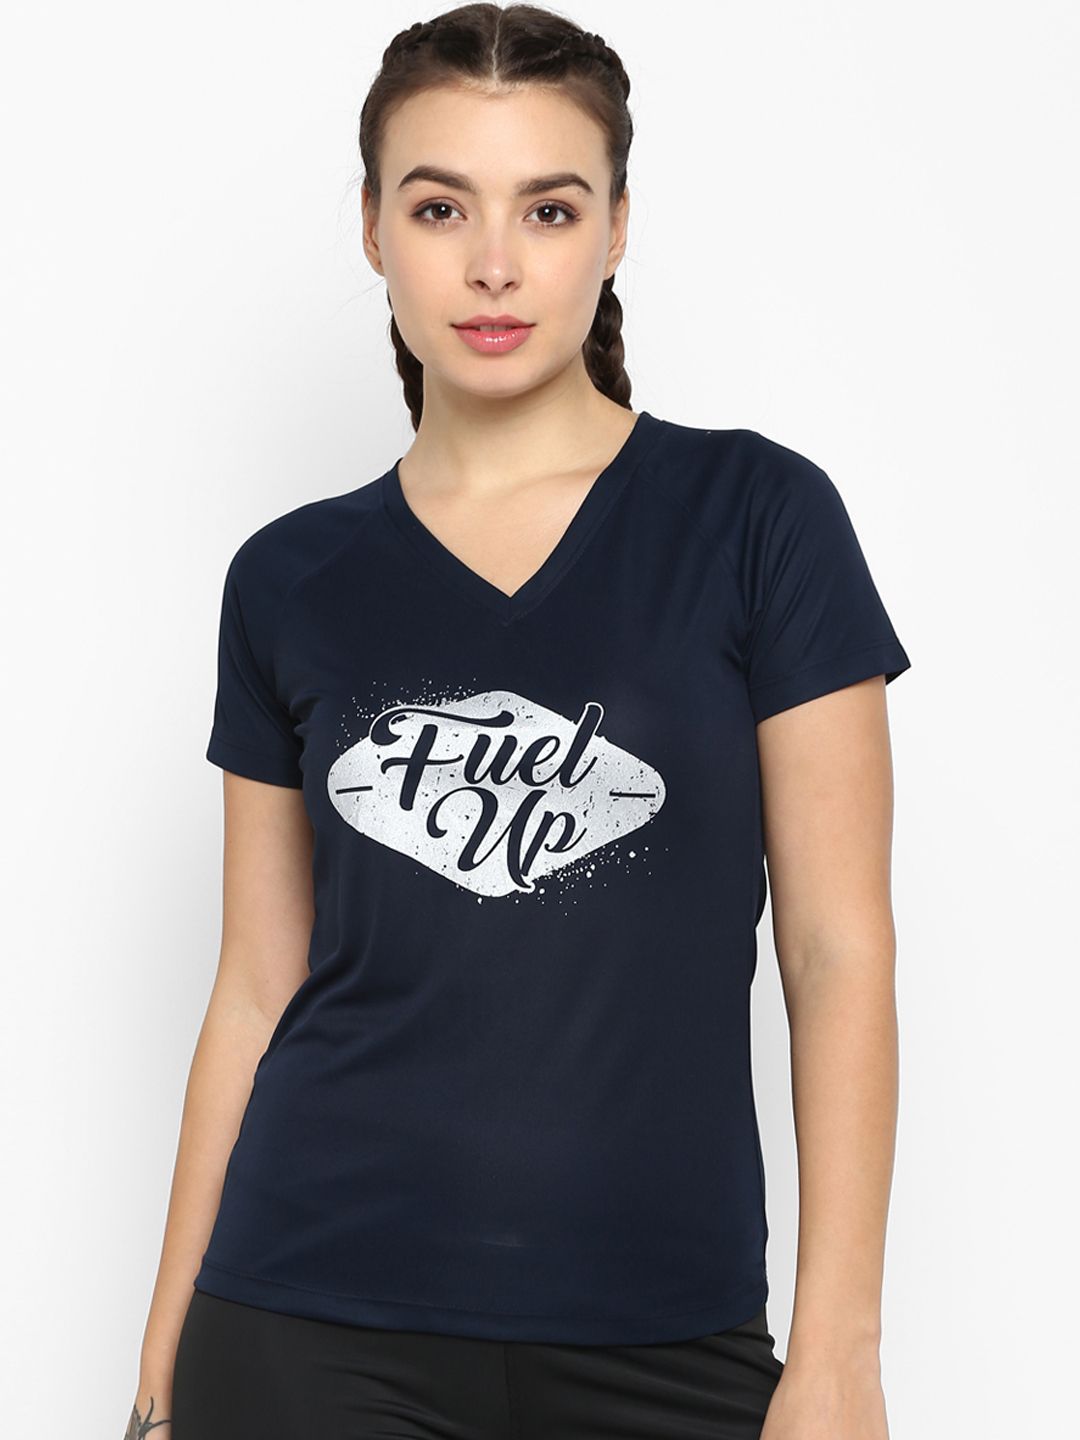 OFF LIMITS Women Navy Blue Printed V-Neck Slim Fit T-shirt Price in India